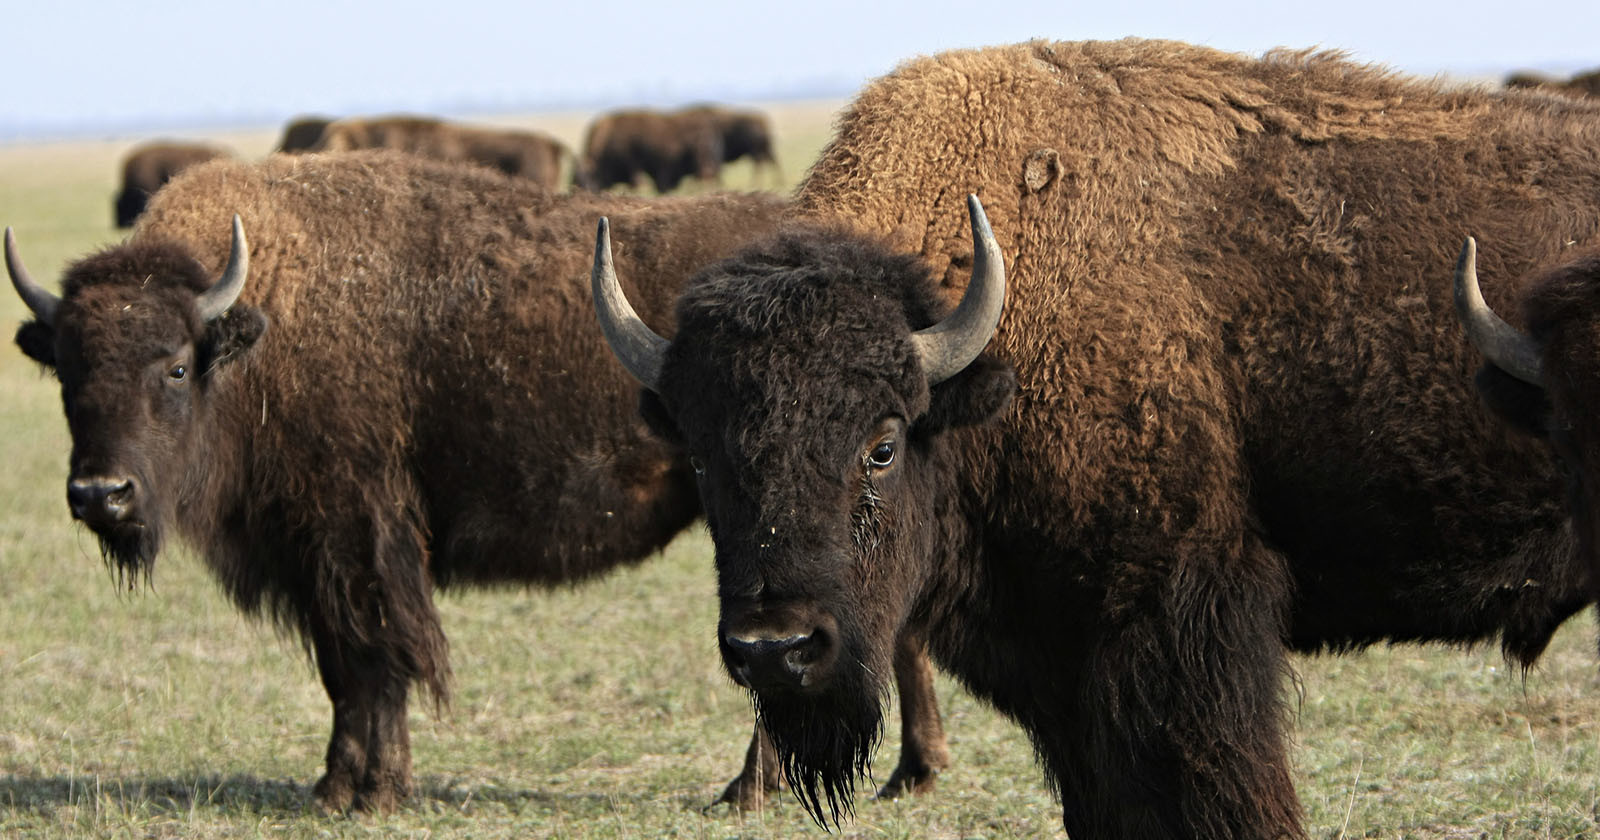 Photographer Charged by Buffalo After Getting Too Close